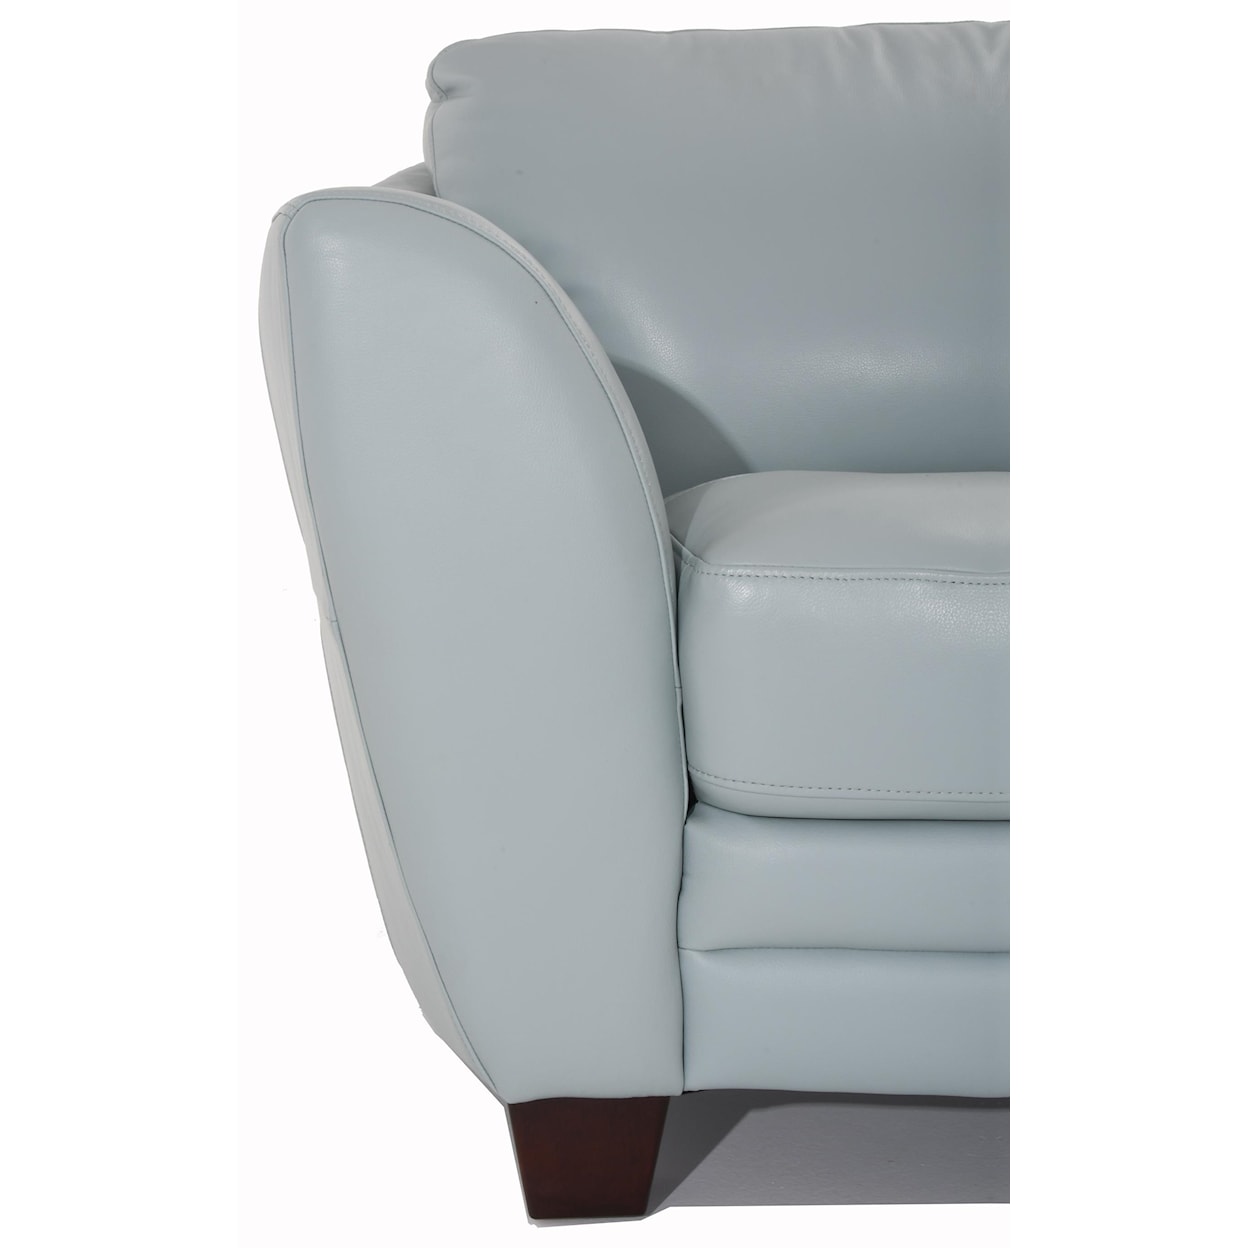 Futura Leather 8511 Leather Chair